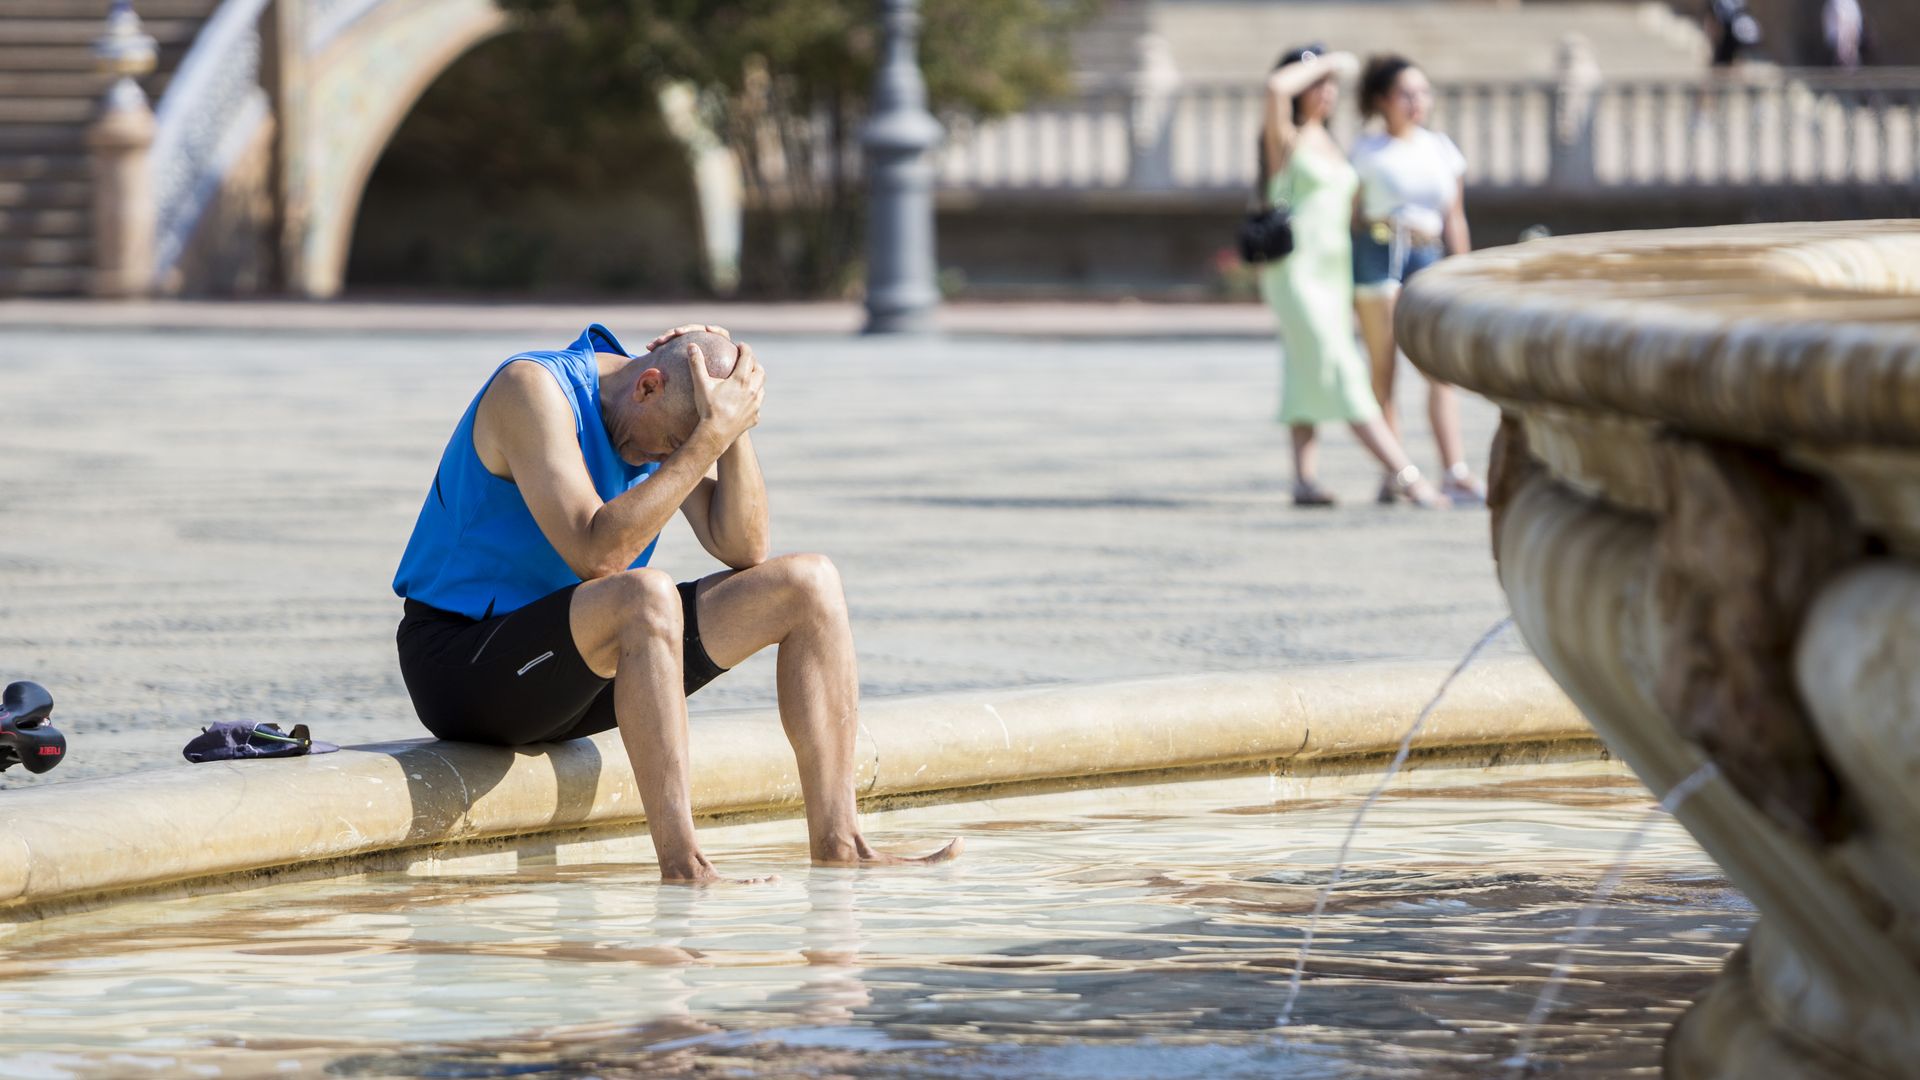 A man cools off in the central fountain in the Plaza de España in Seville.